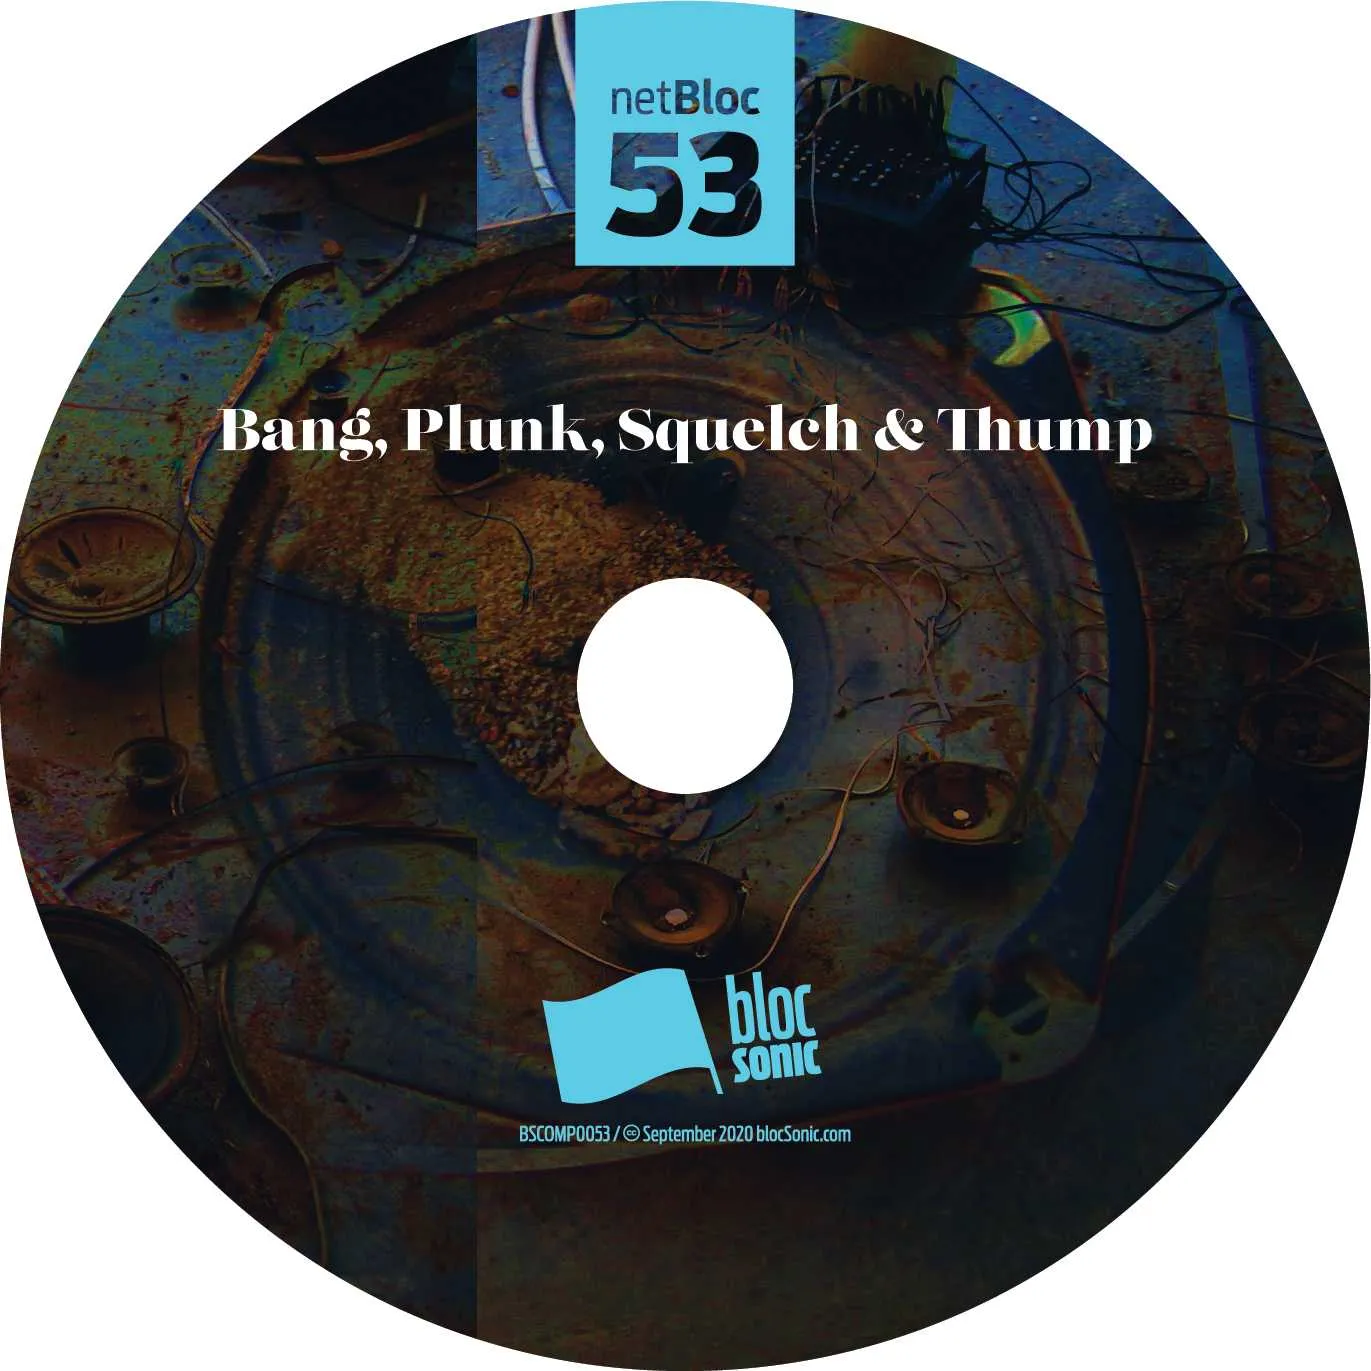 Album disc for “netBloc Vol. 53: Bang, Plunk, Squelch &amp; Thump” by Various Artists